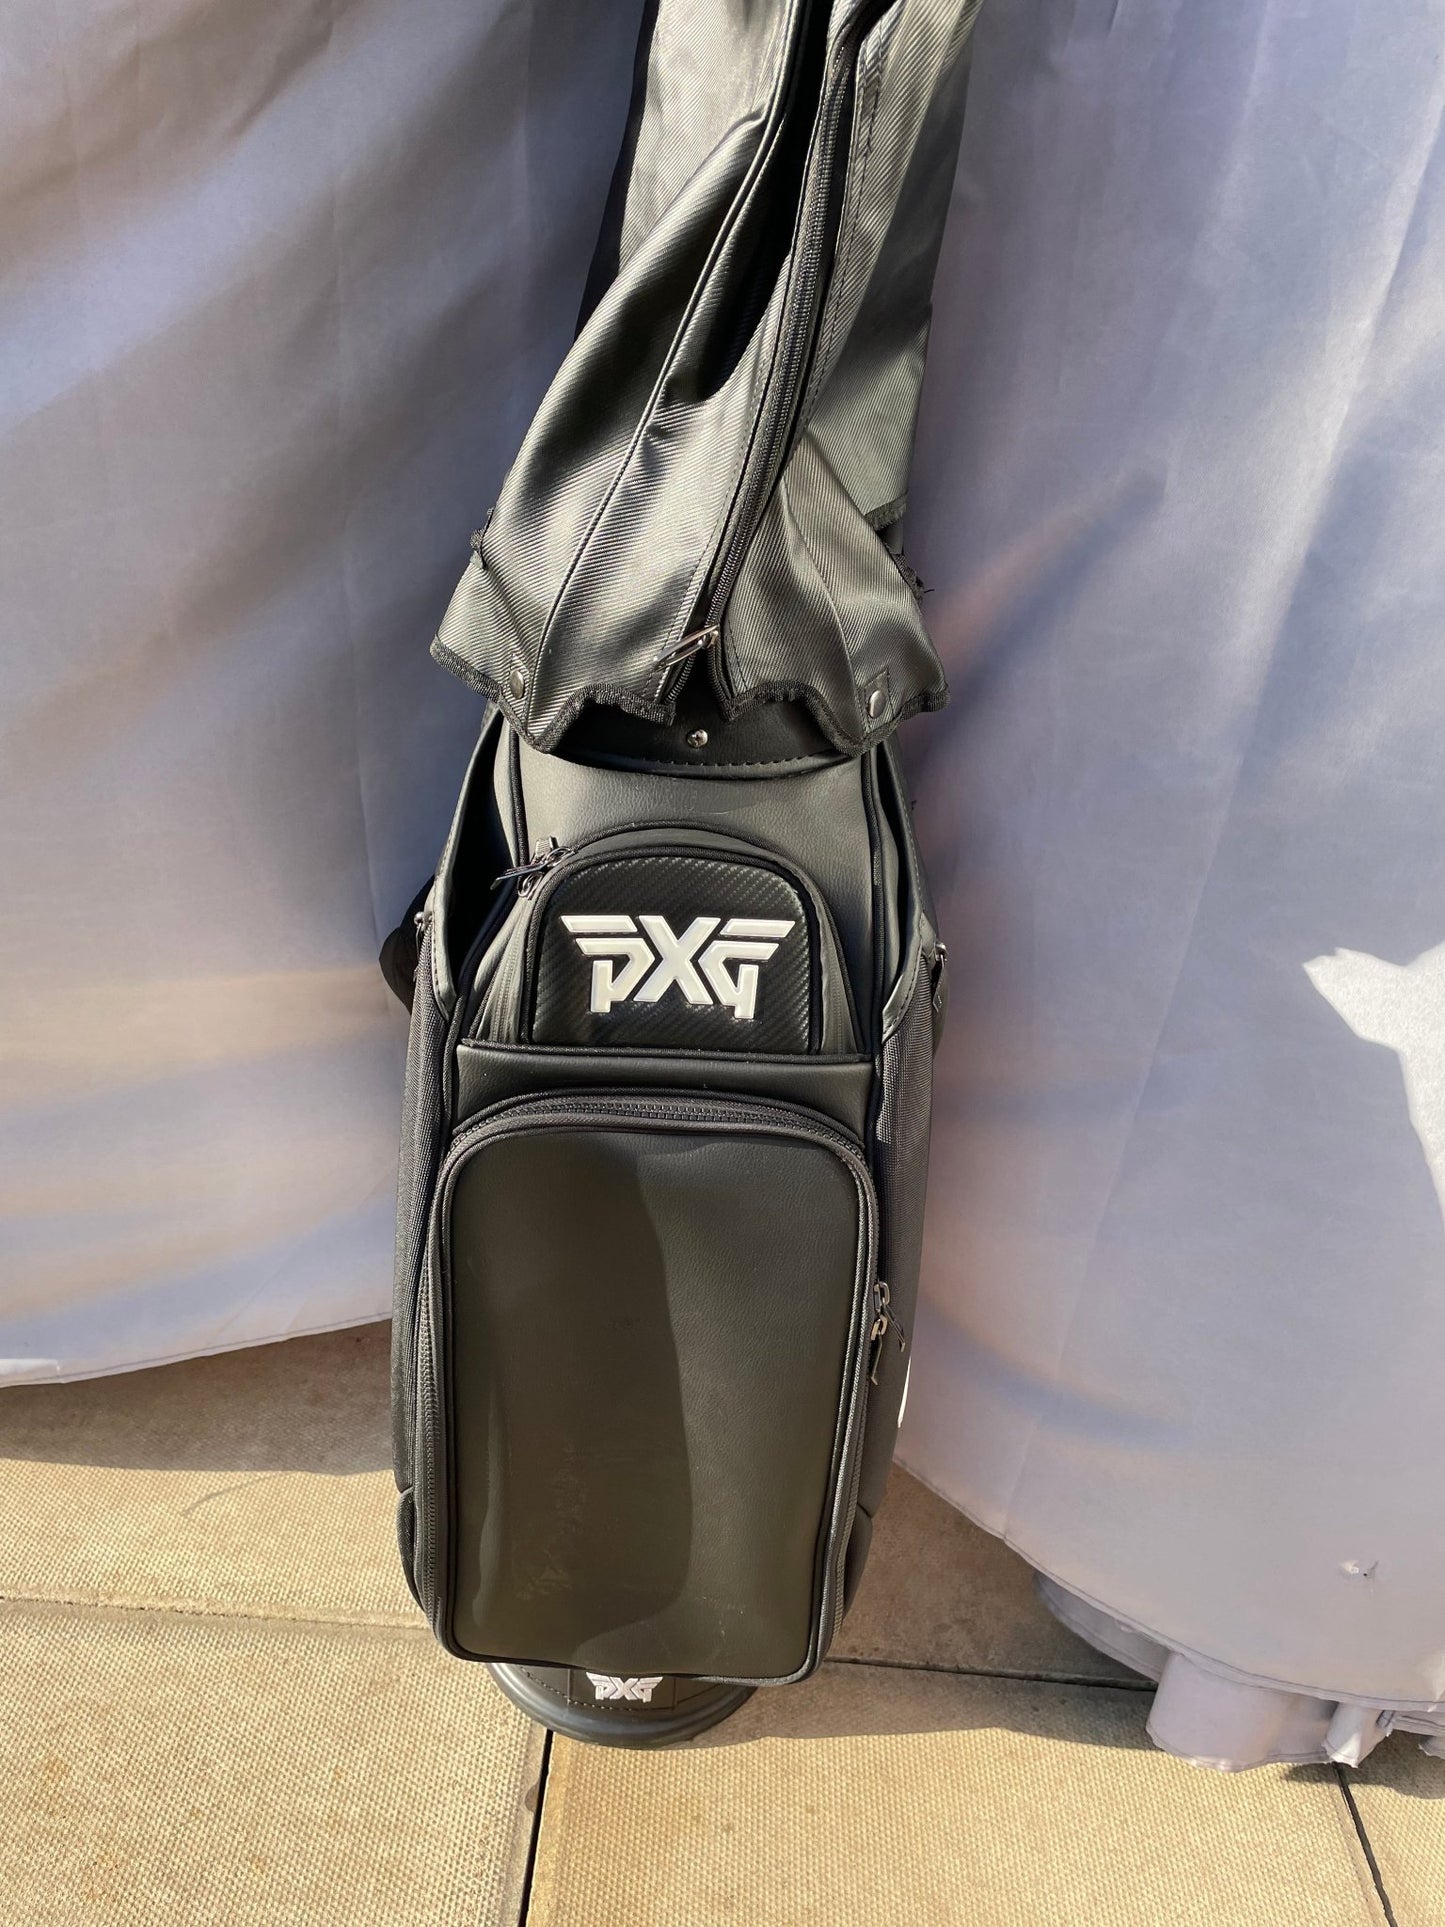 PXG Stunning Tour Bag with Rain Hood - only £165.00 Please read description before purchasing! - Golf Store UK